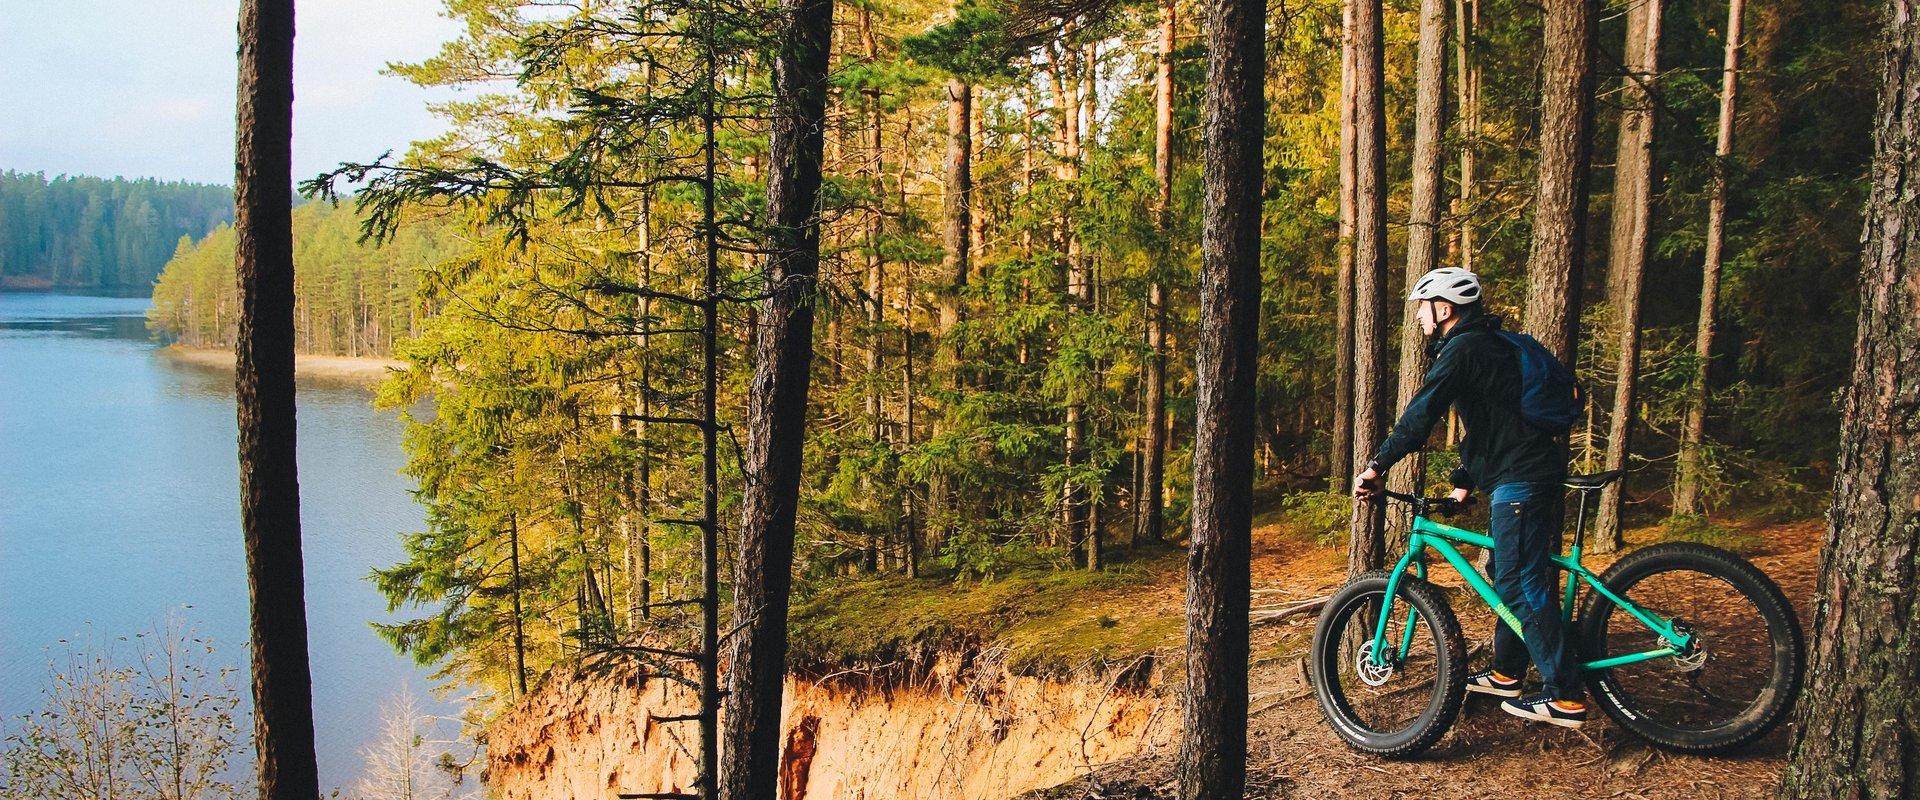 Discover the South Estonian hiking trails on fatbikes. We provide you with a high-quality fatbike, bicycle helmet, and exciting maps or ideas for the 